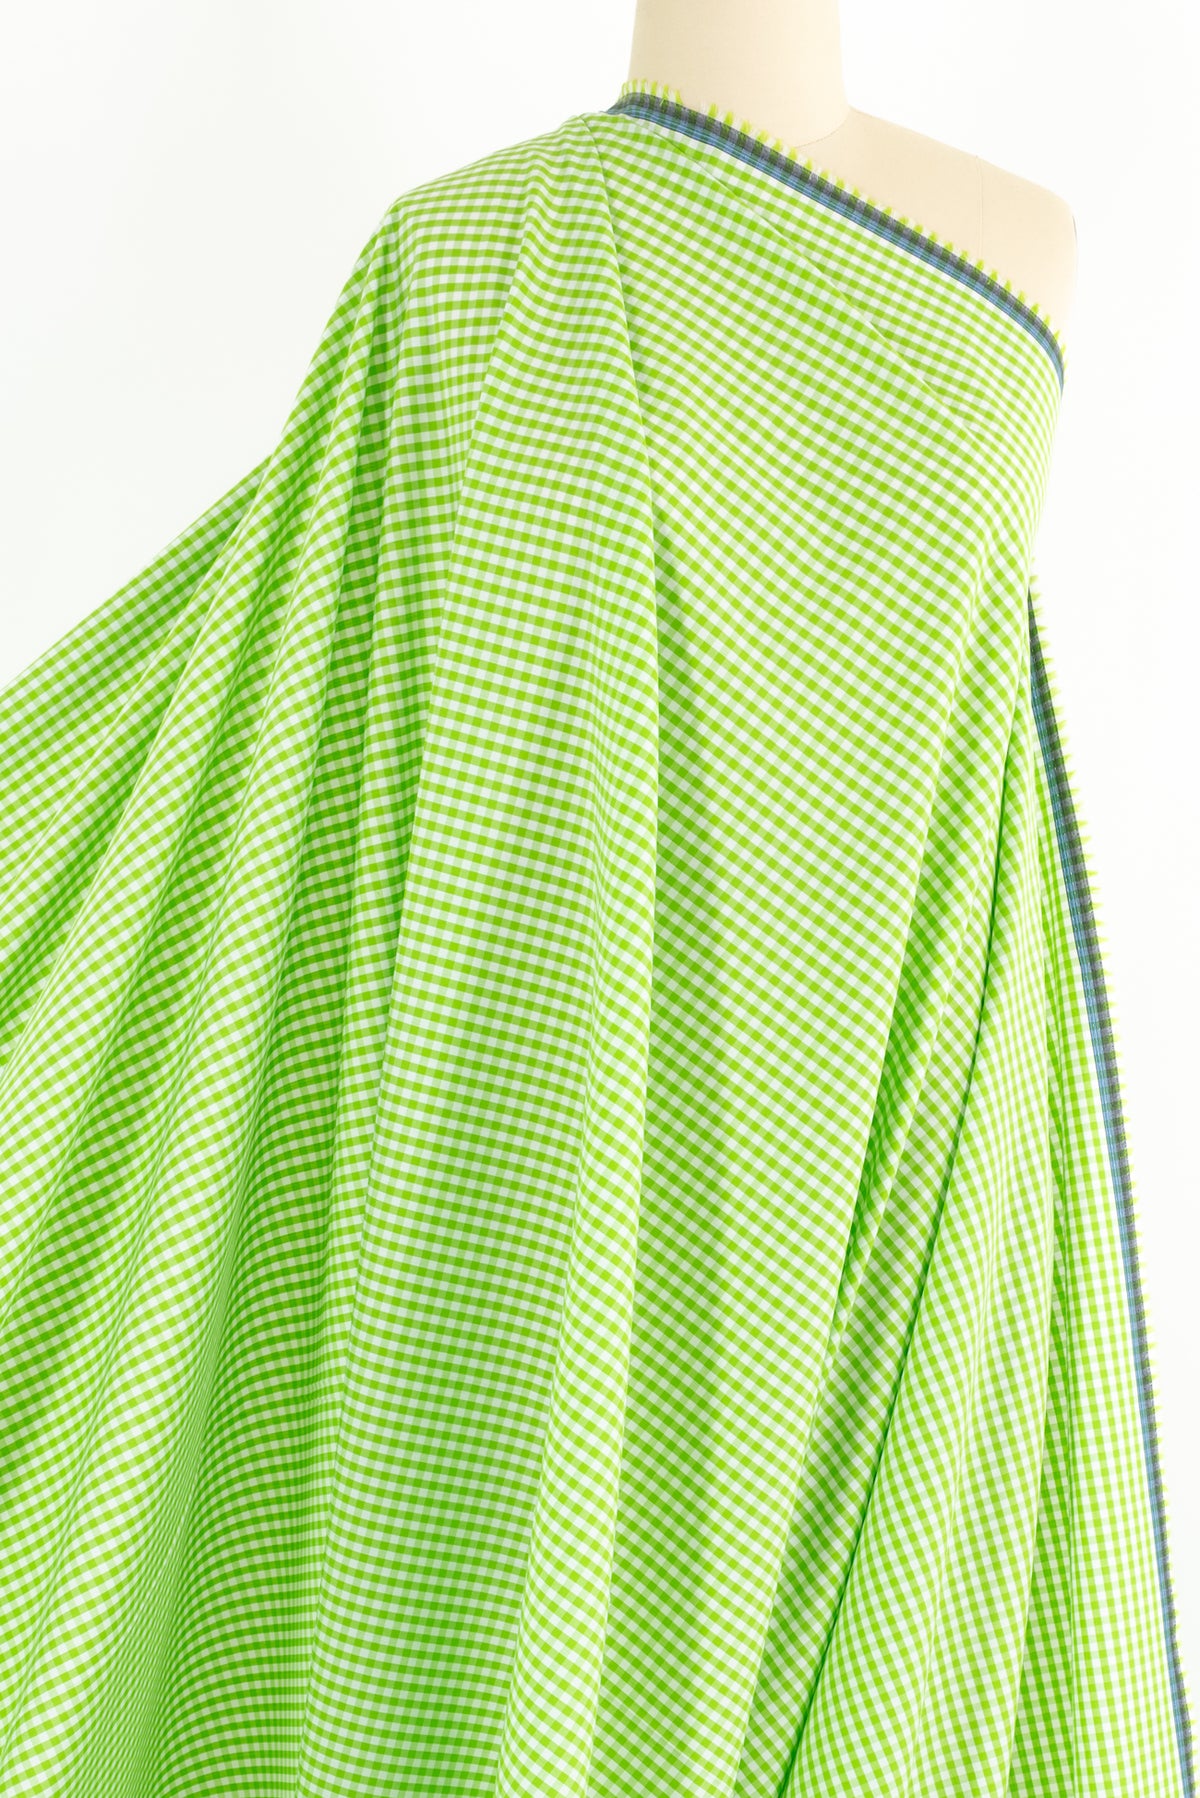 Limesicle Japanese Cotton Gingham Woven